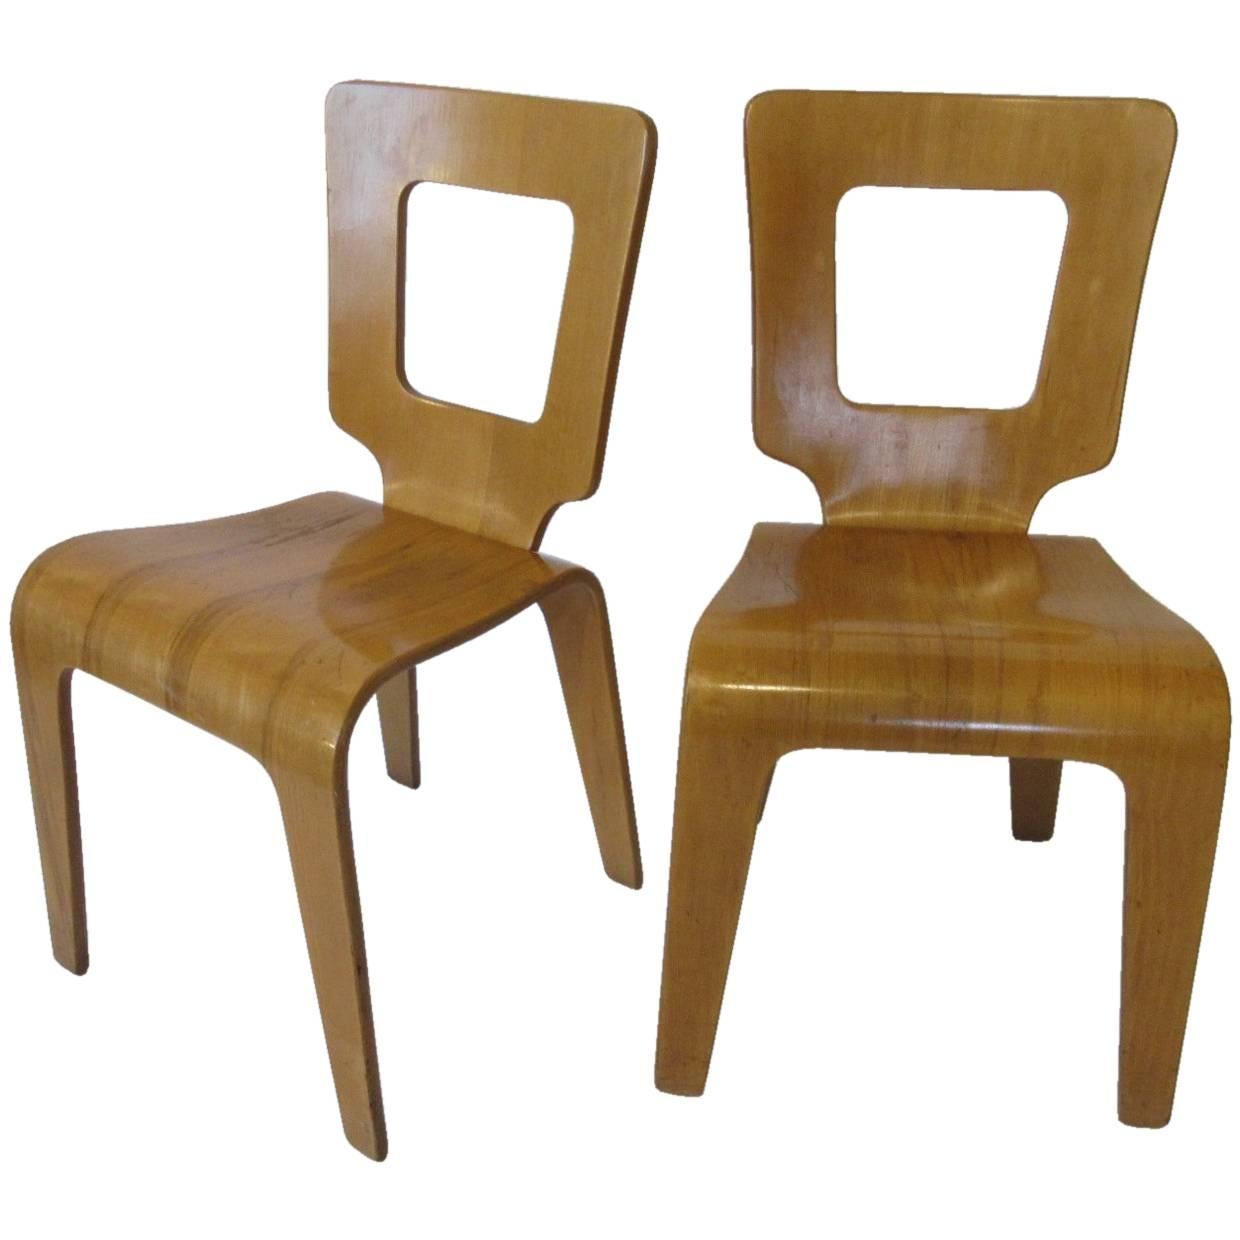 Thaden Jordan Eames Styled Molded Plywood Side Chairs